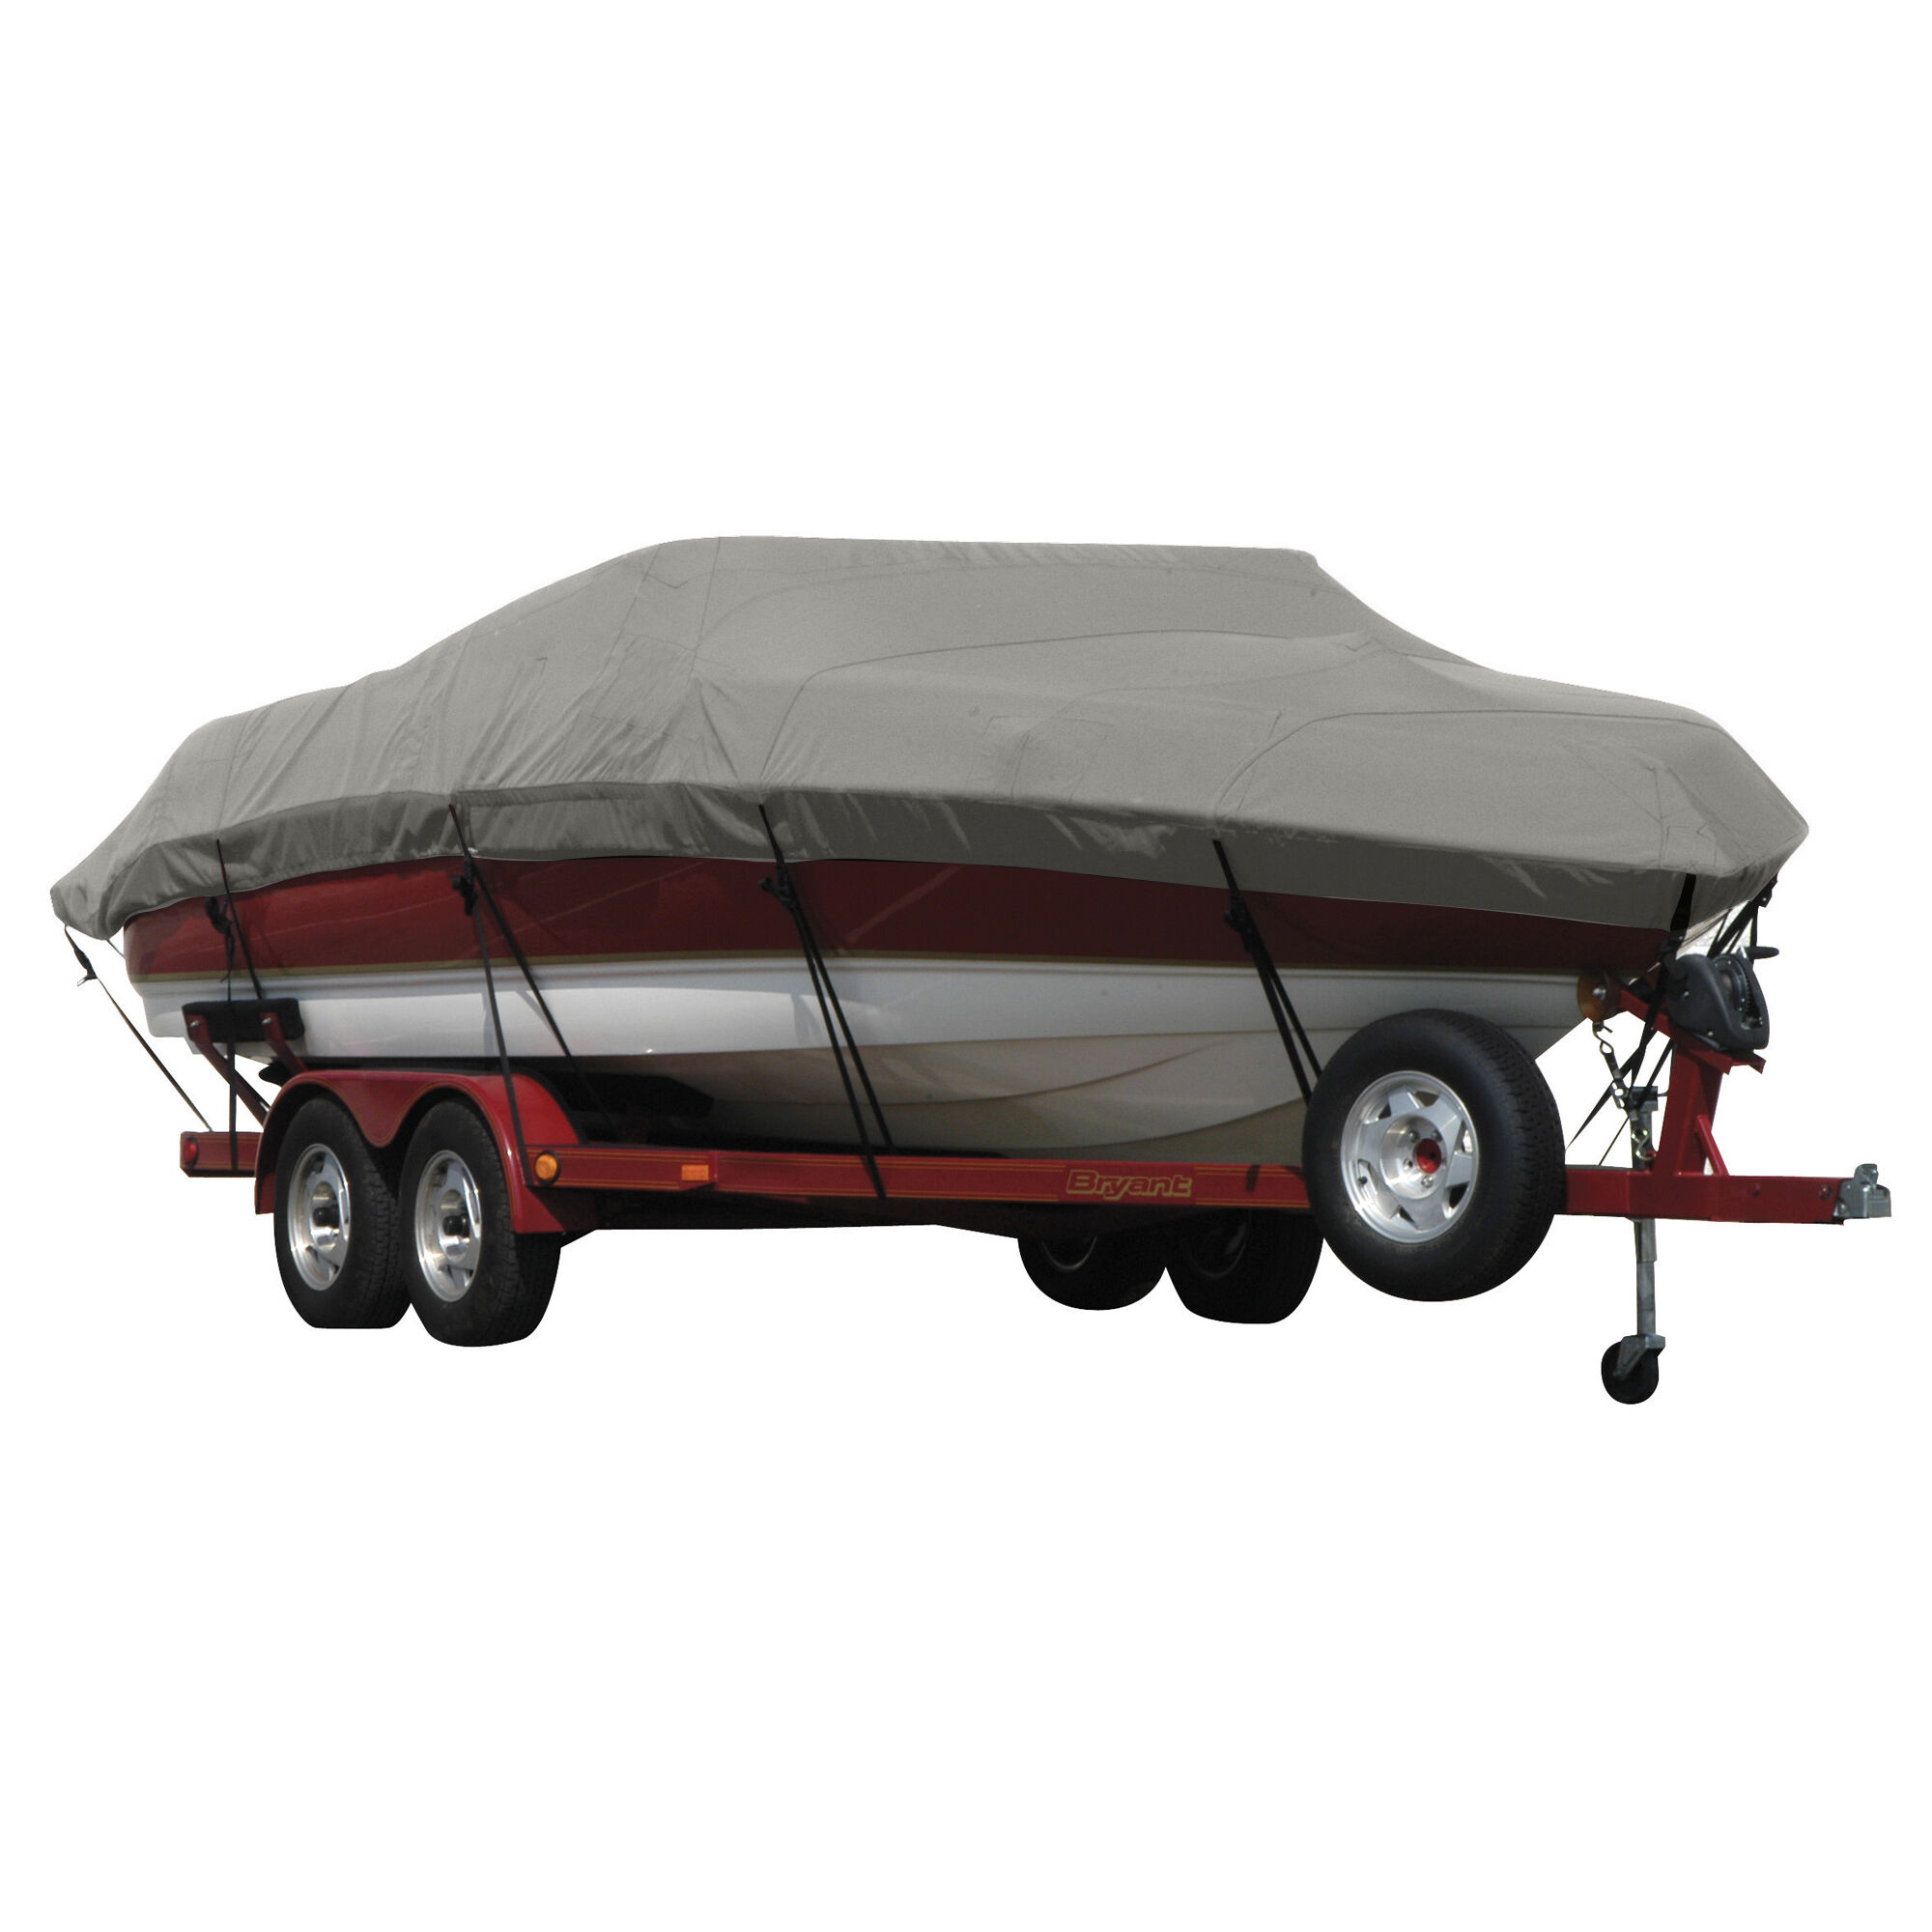 Covermate Exact Fit Sunbrella Boat Cover for Lund 18 Mr Pike 18 Mr Pike Side Console w/ Evinrude Trolling Motor O/B. Charcoal Grey Heather in